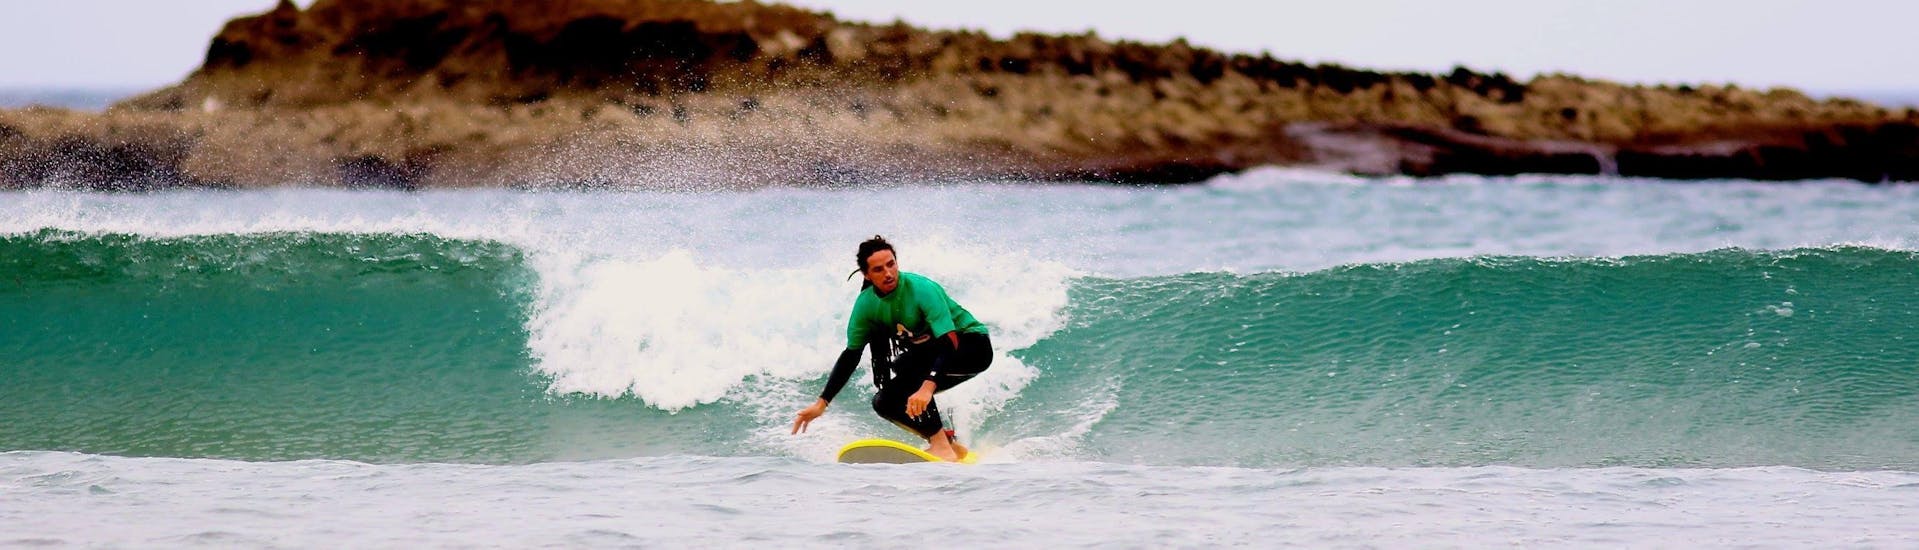 A small wave for a surfer during a Surfing Lessons for Kids and Adults - Advanced with Amado Surf School.